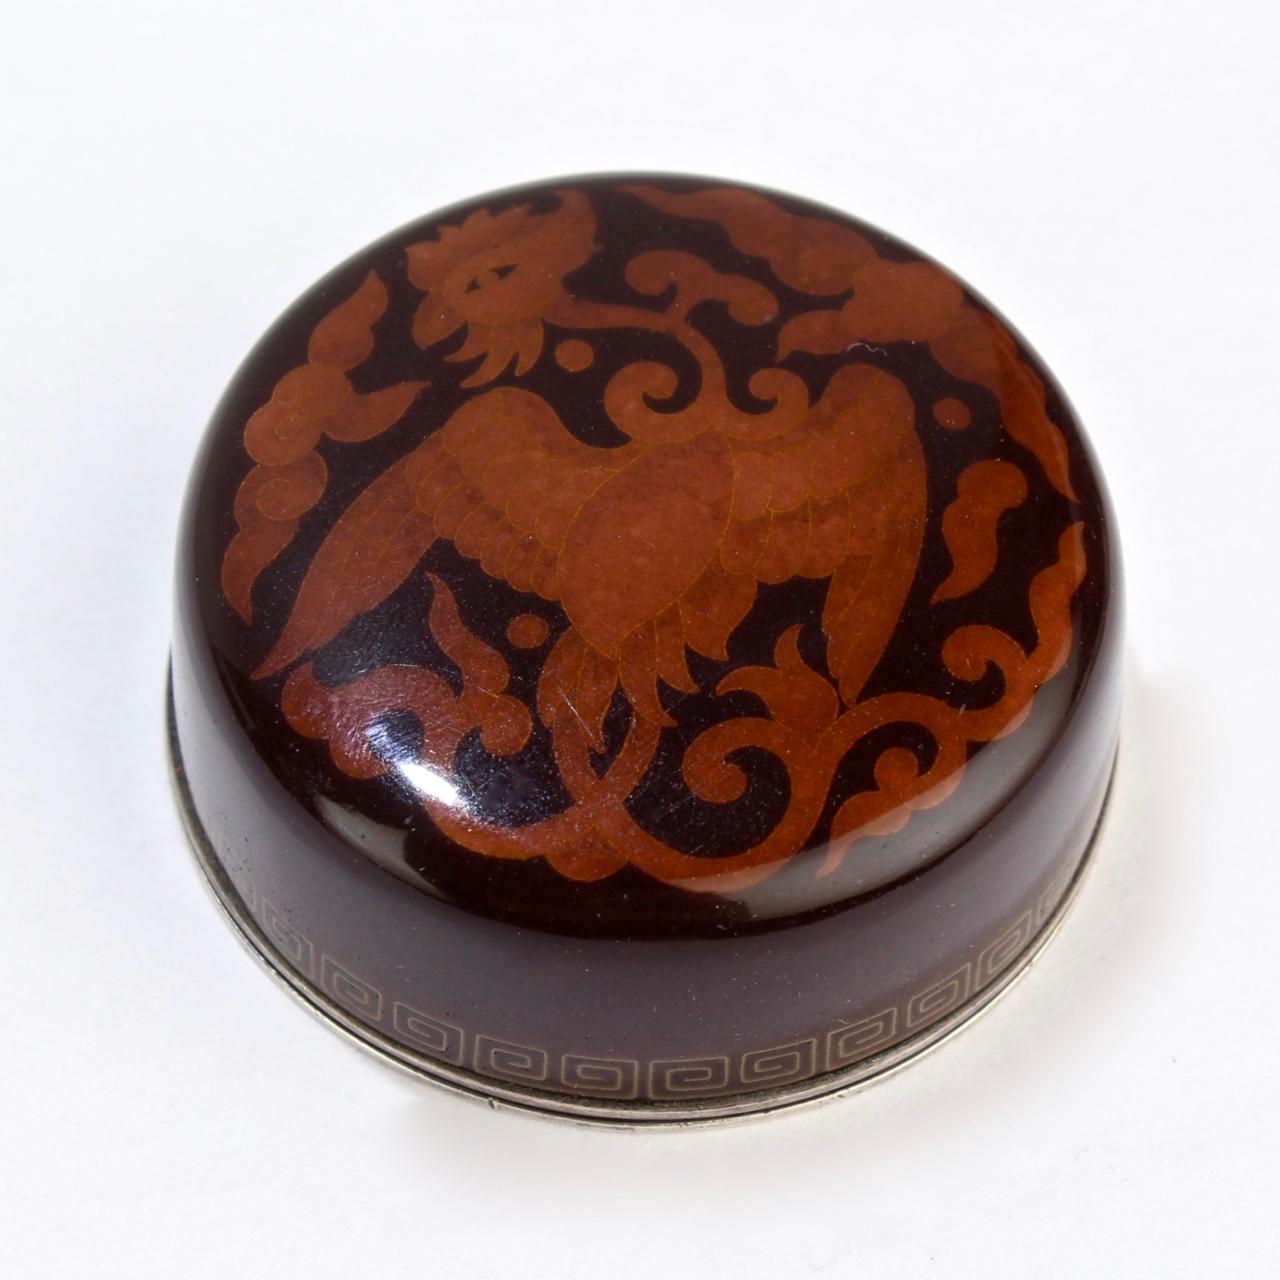 A fine, vintage Japanese cloisonné round box by Inaba. Possibly originally meant for incense.

A simple and compelling form of a fitted slide lid box with decoration of a phoenix and stylized clouds in orange and brown tones.

Dating to the at